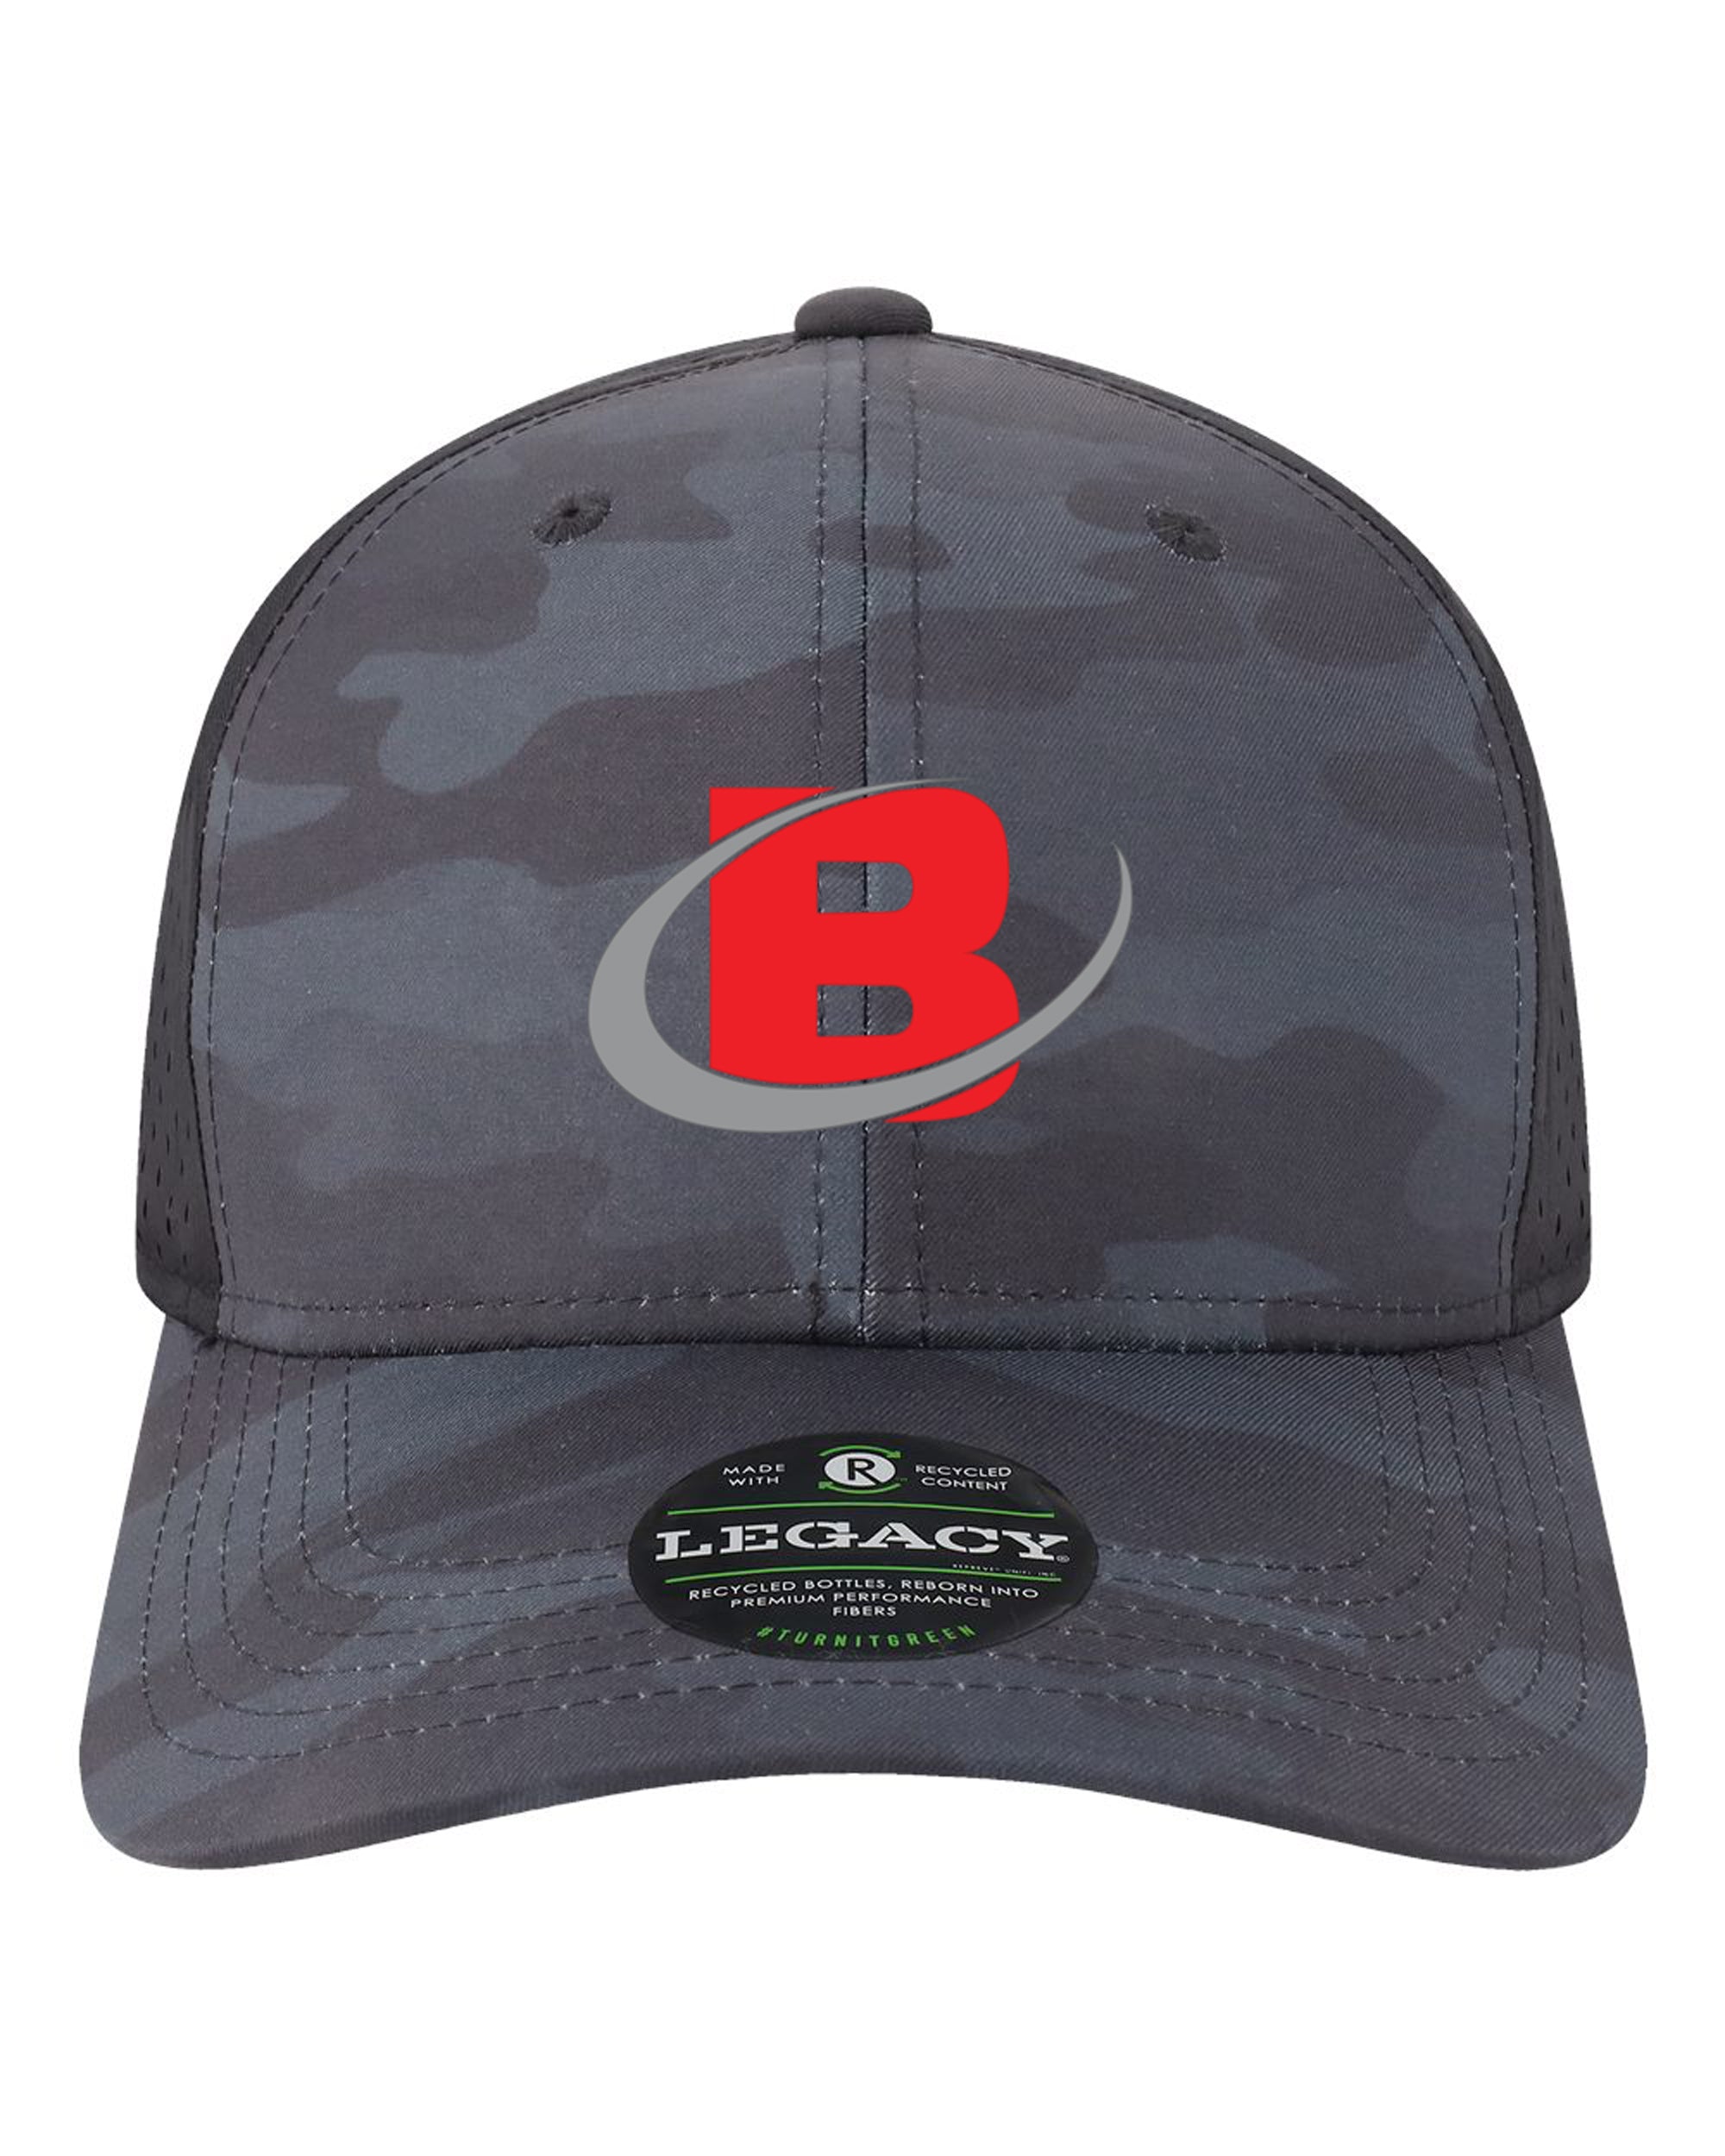 Bowman Excavating - Reclaimed Structured Hat